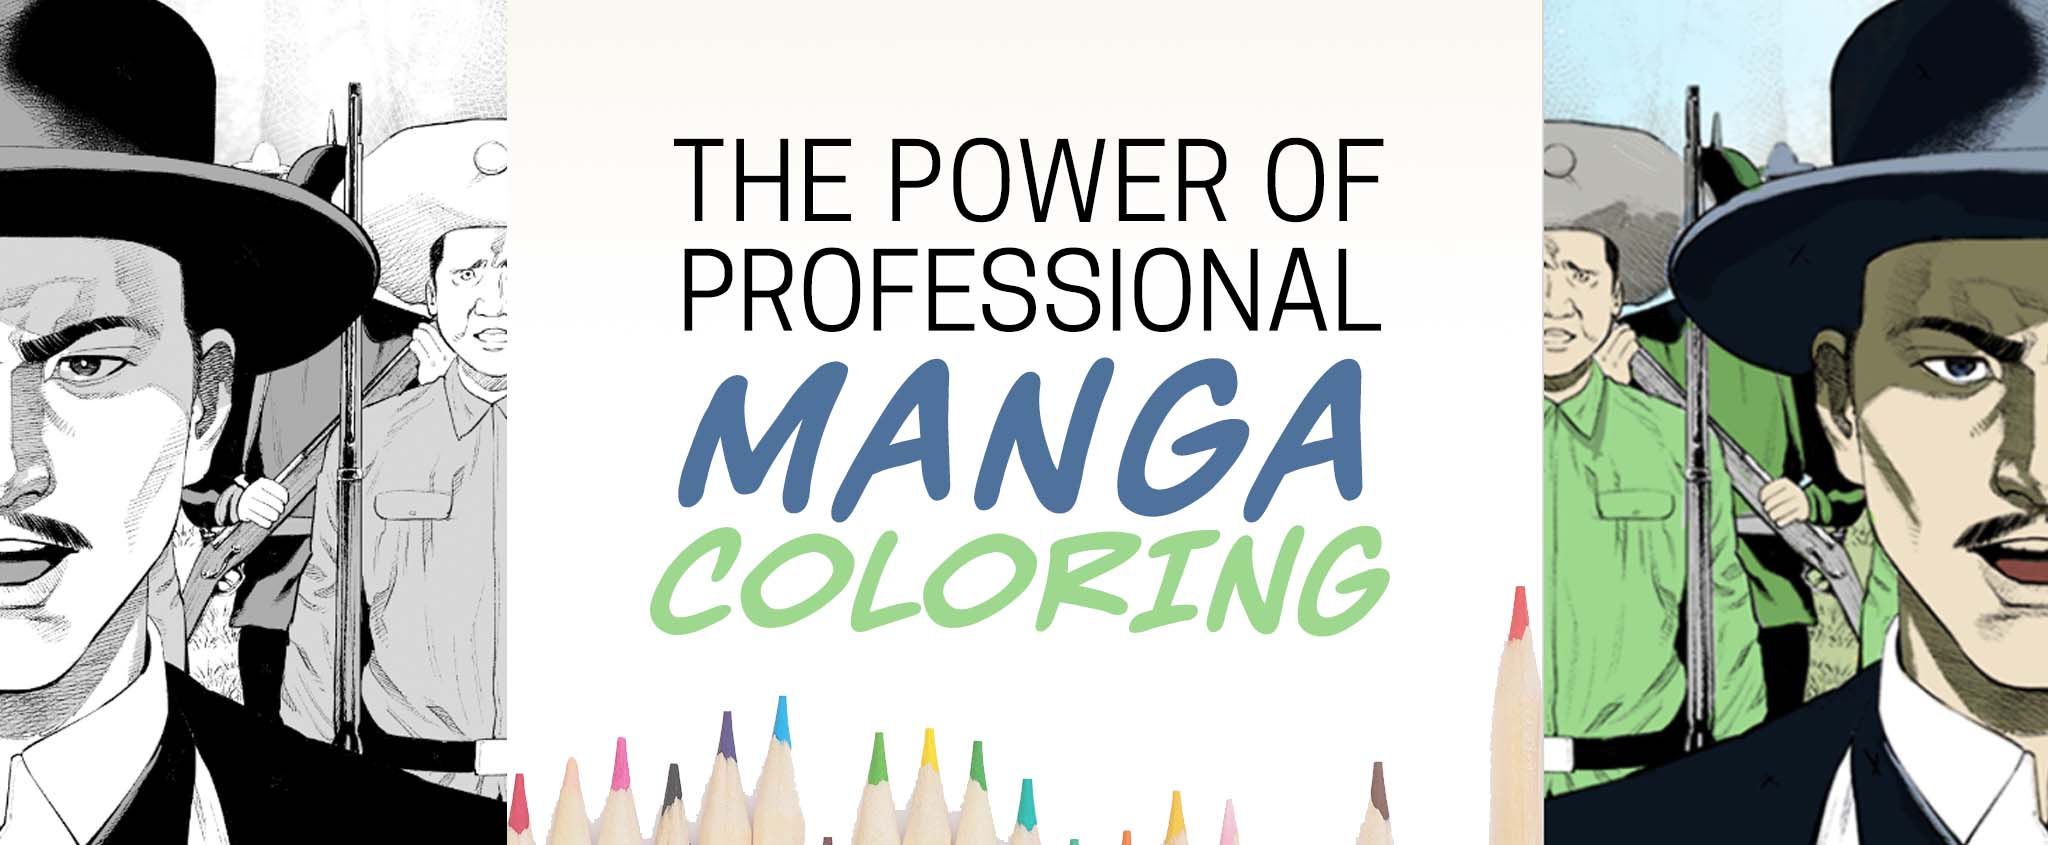 The Power of Professional Manga Coloring: Every Shade Tells a Story